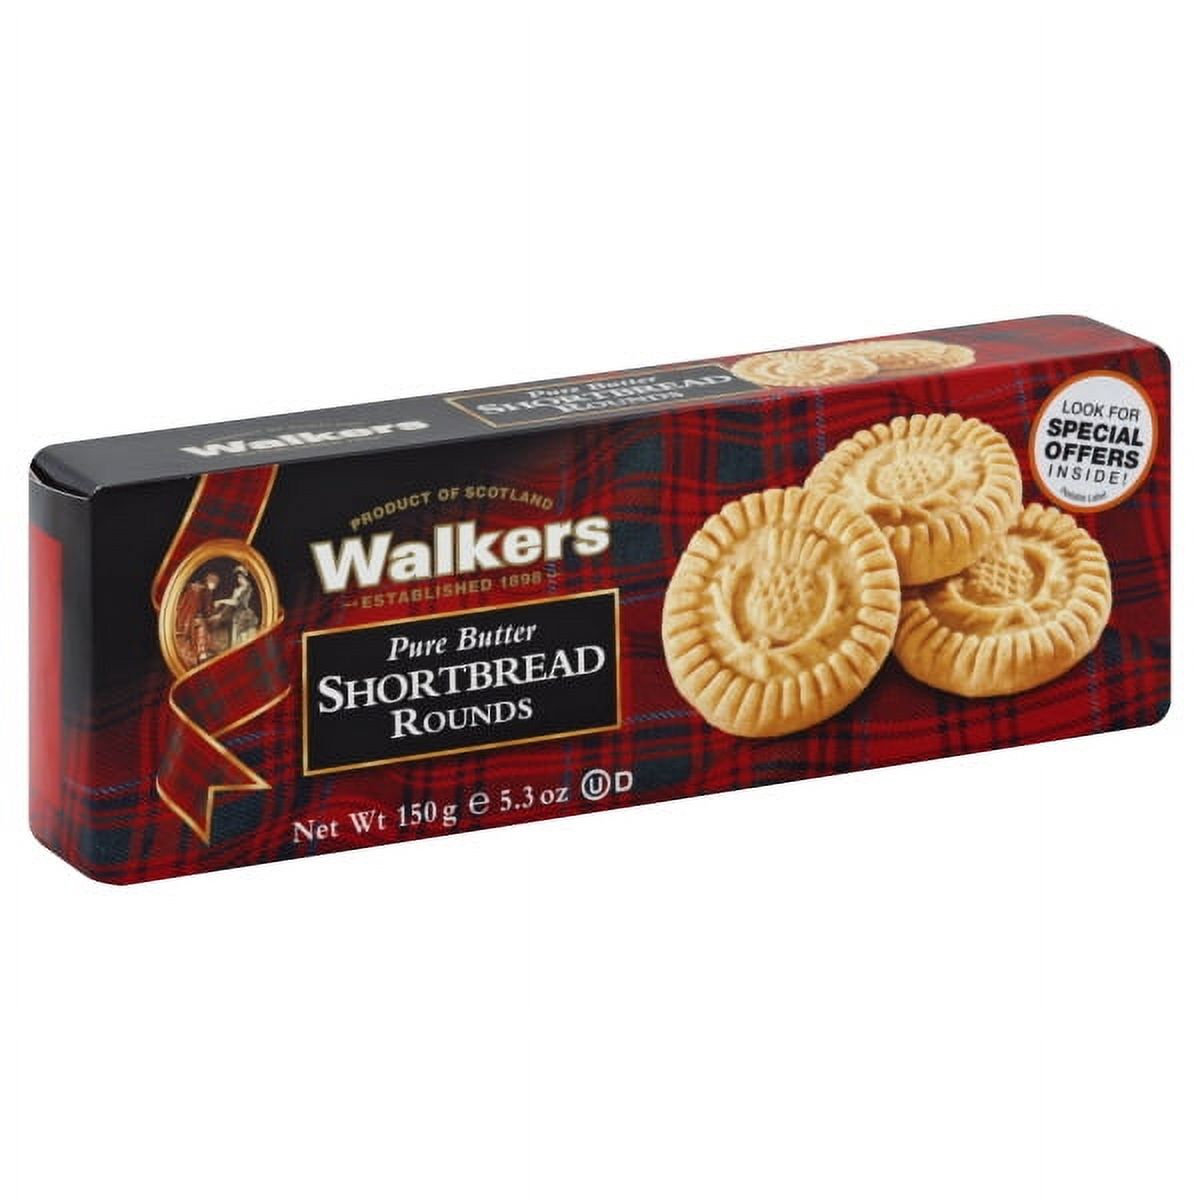 Walkers Pure Butter Shortbread Rounds, 5.3 Oz. - image 1 of 7